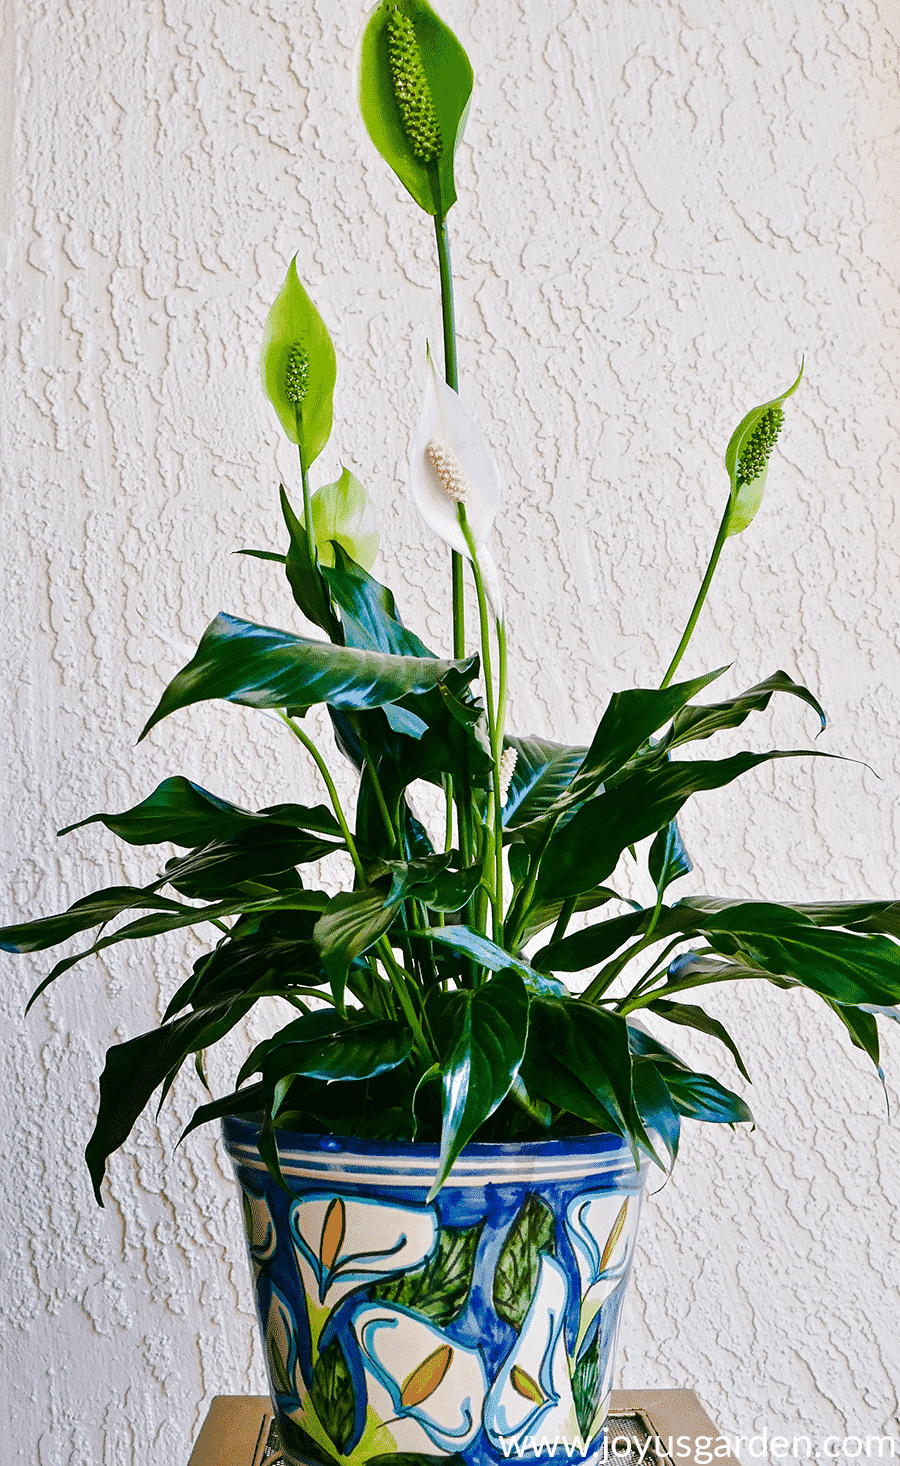 Peace lily with white & green flowers on display in gorgeous blue pot.